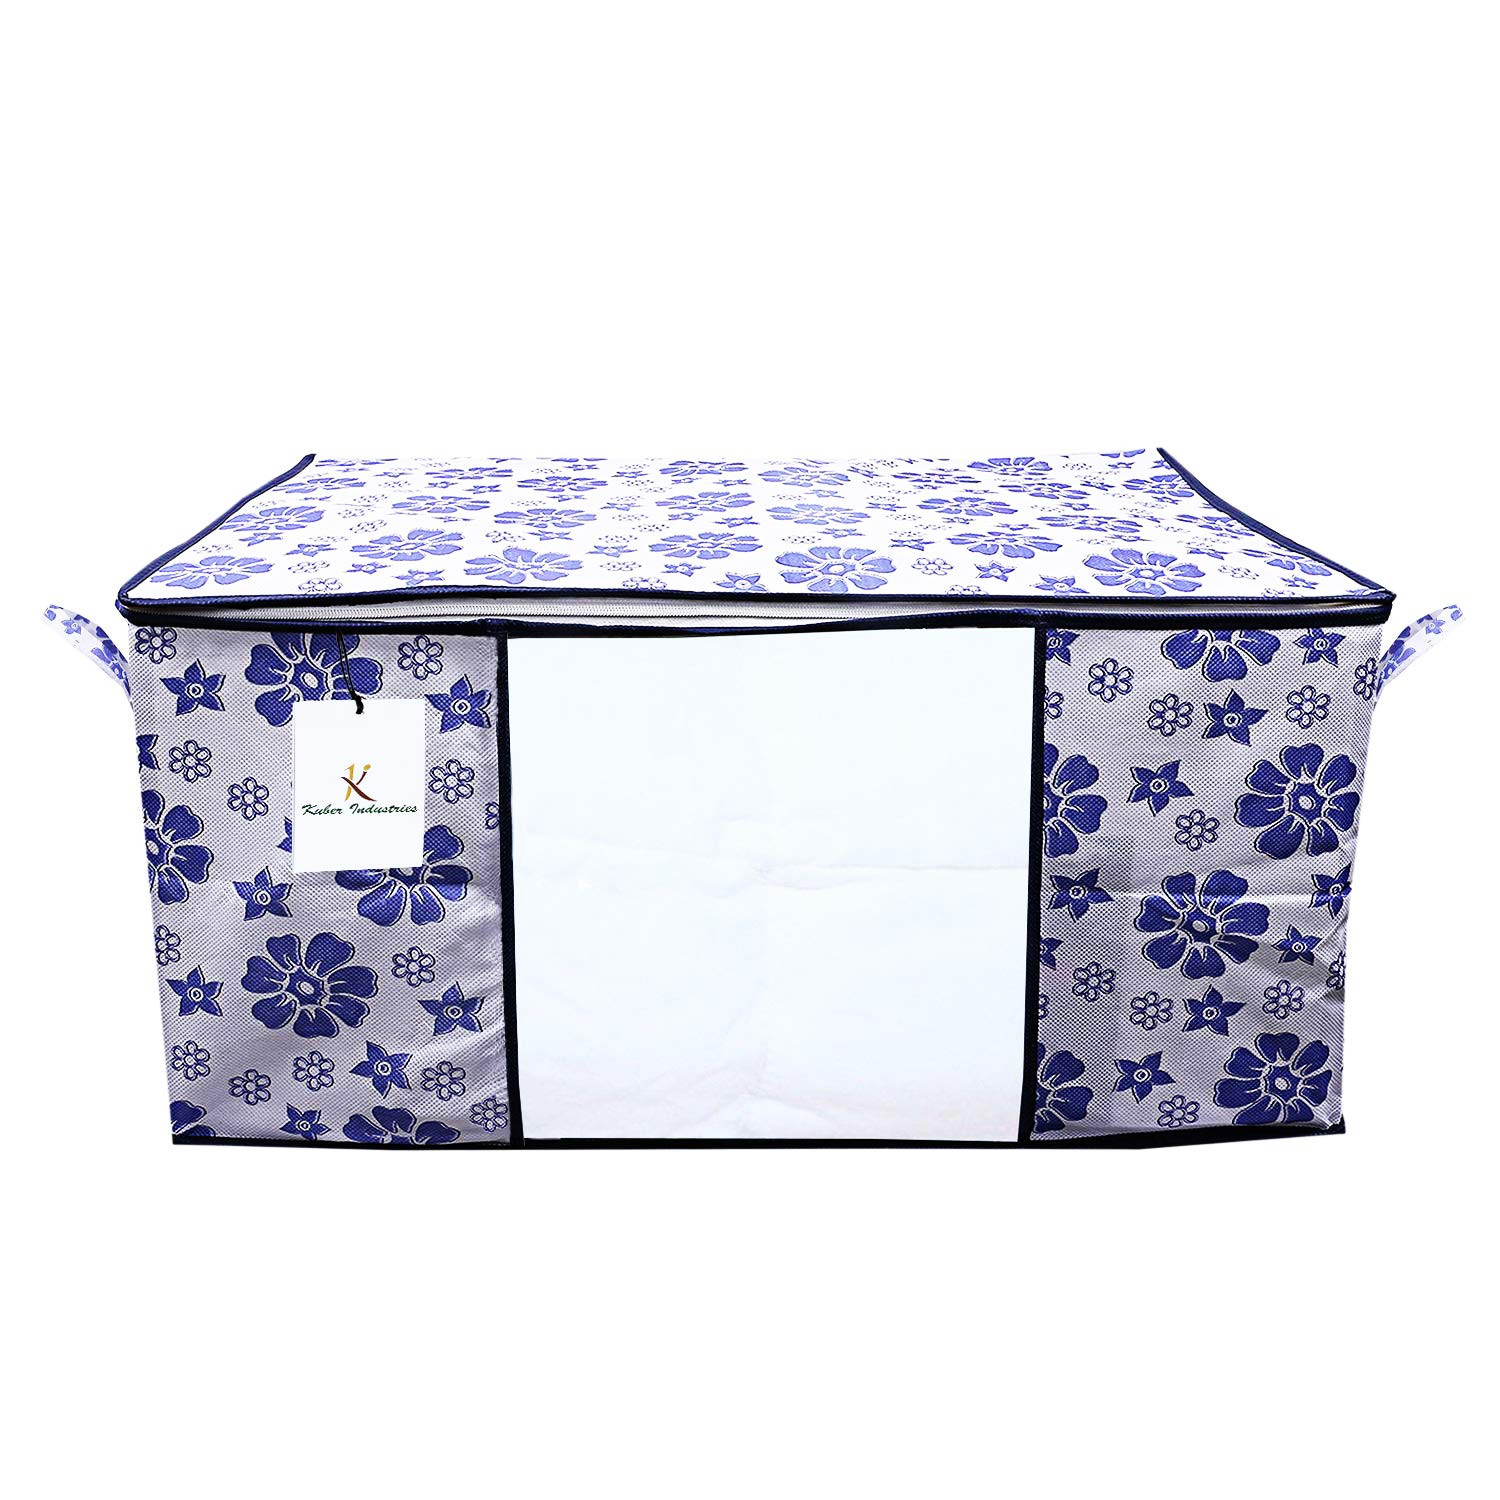 Kuber Industries Flower Printed Non Woven Fabric Underbed Storage Bag,Cloth Organiser,Blanket Cover with Transparent Window, Pink & Blue & Ivory Red -CTKTC41081